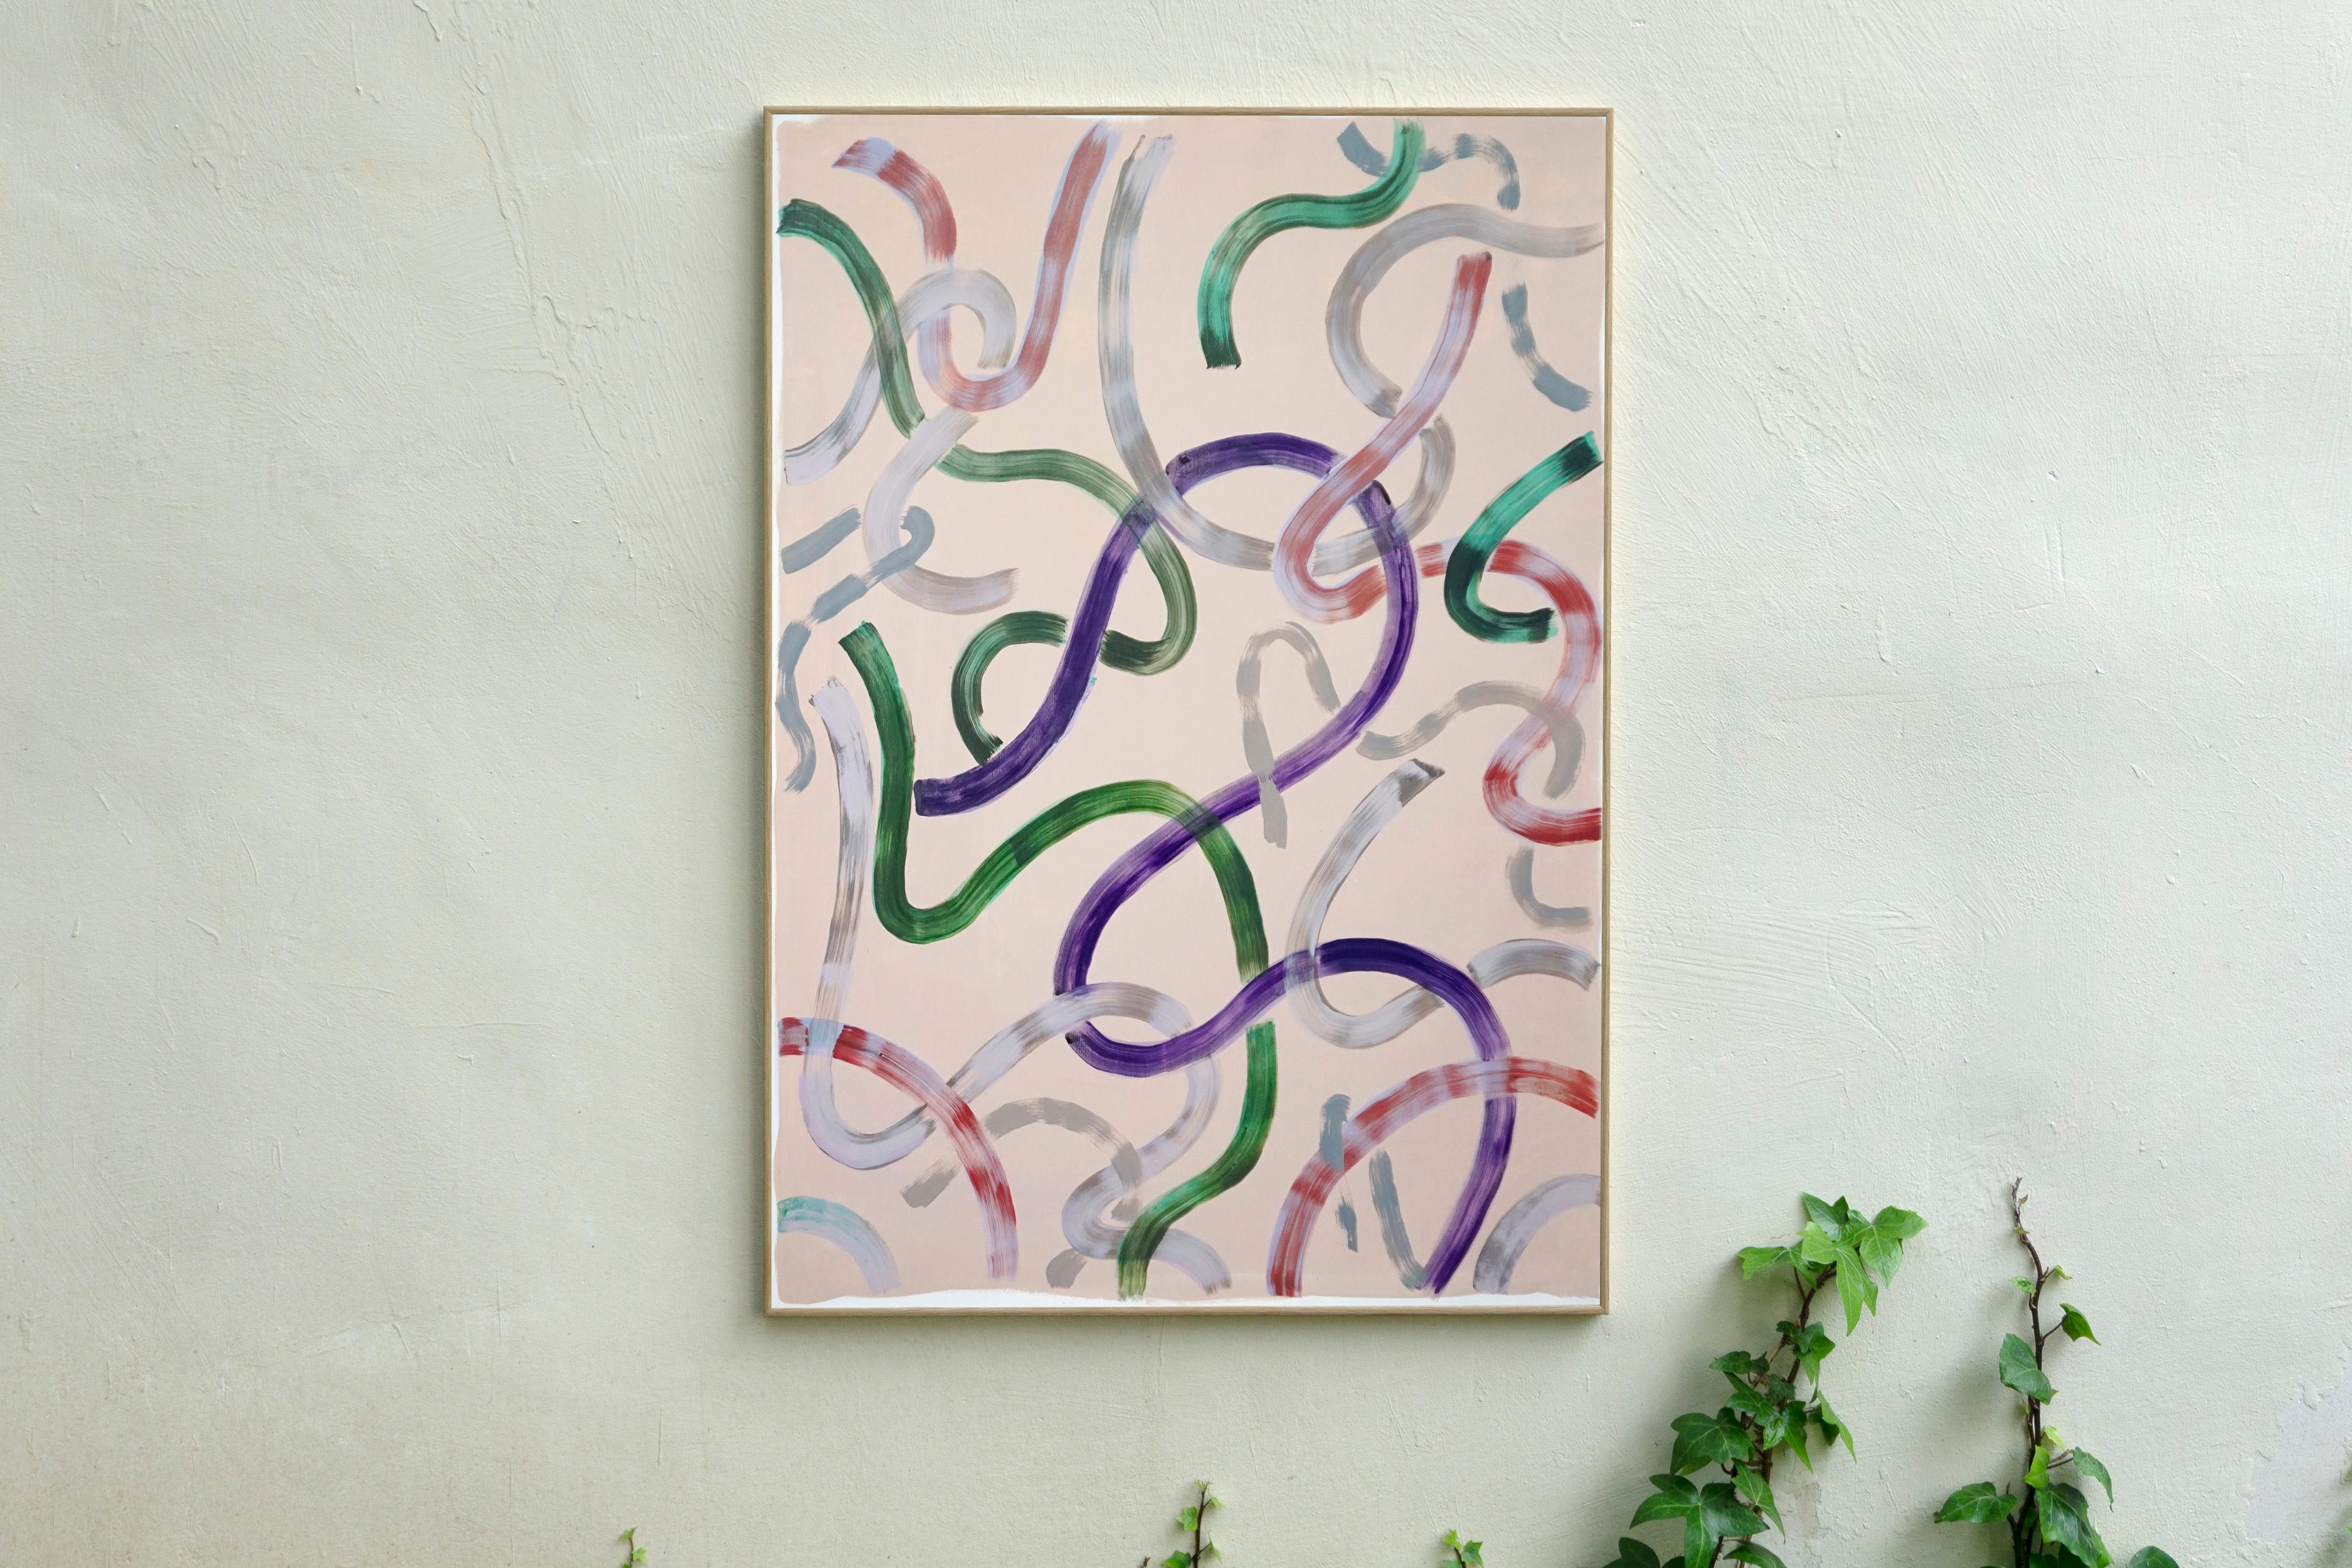 Green and Purple Outlines on Ivory, Abstract Organic Brushstrokes on Paper, 2020 - Gray Abstract Painting by Unknown